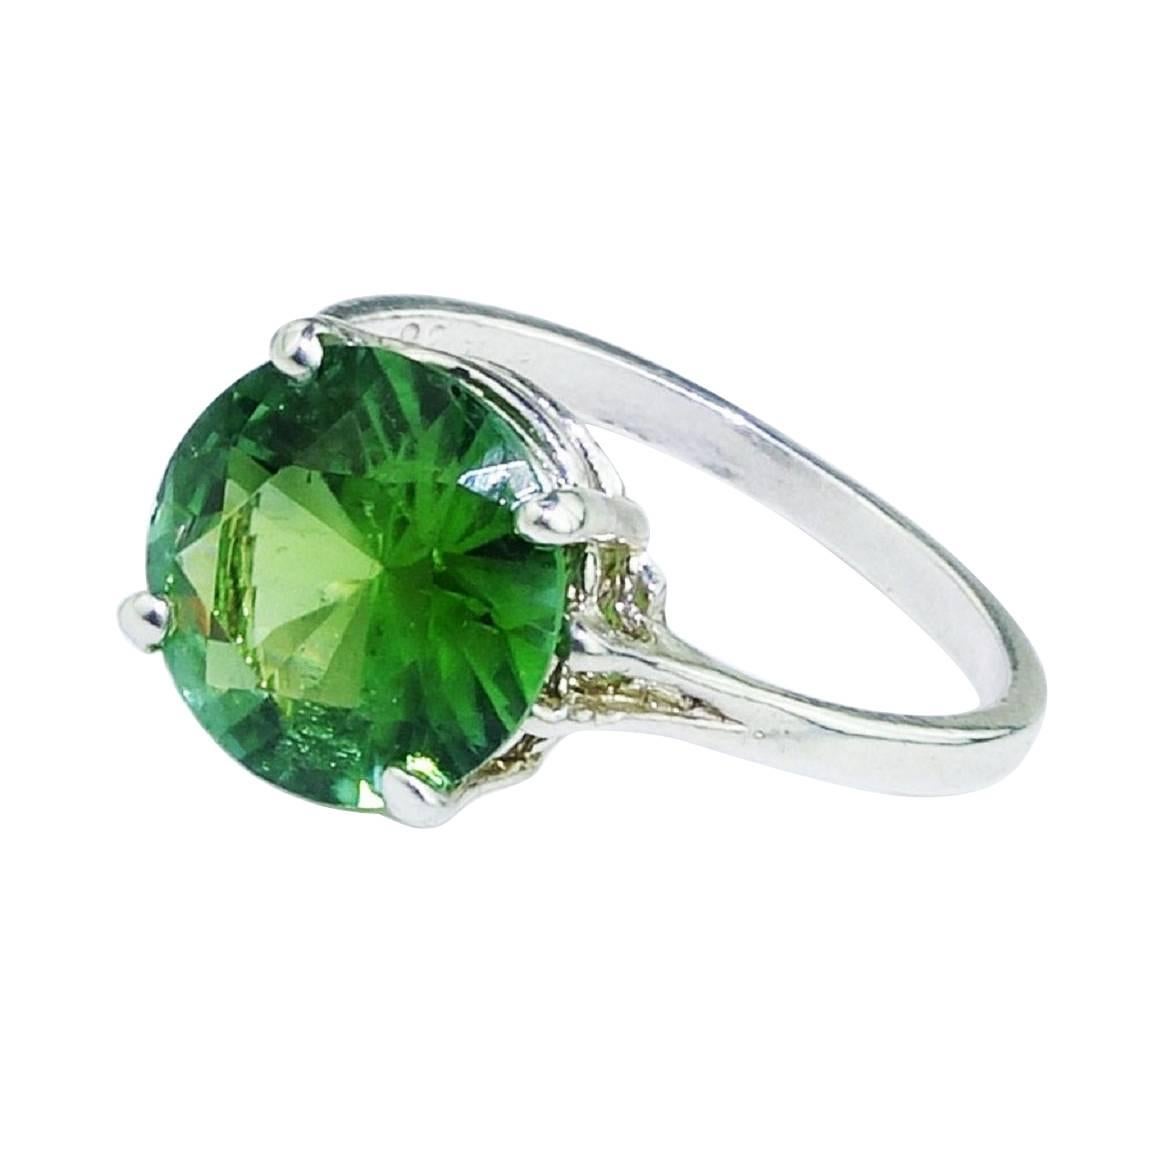 Round Green Tourmaline Sterling Silver Ring